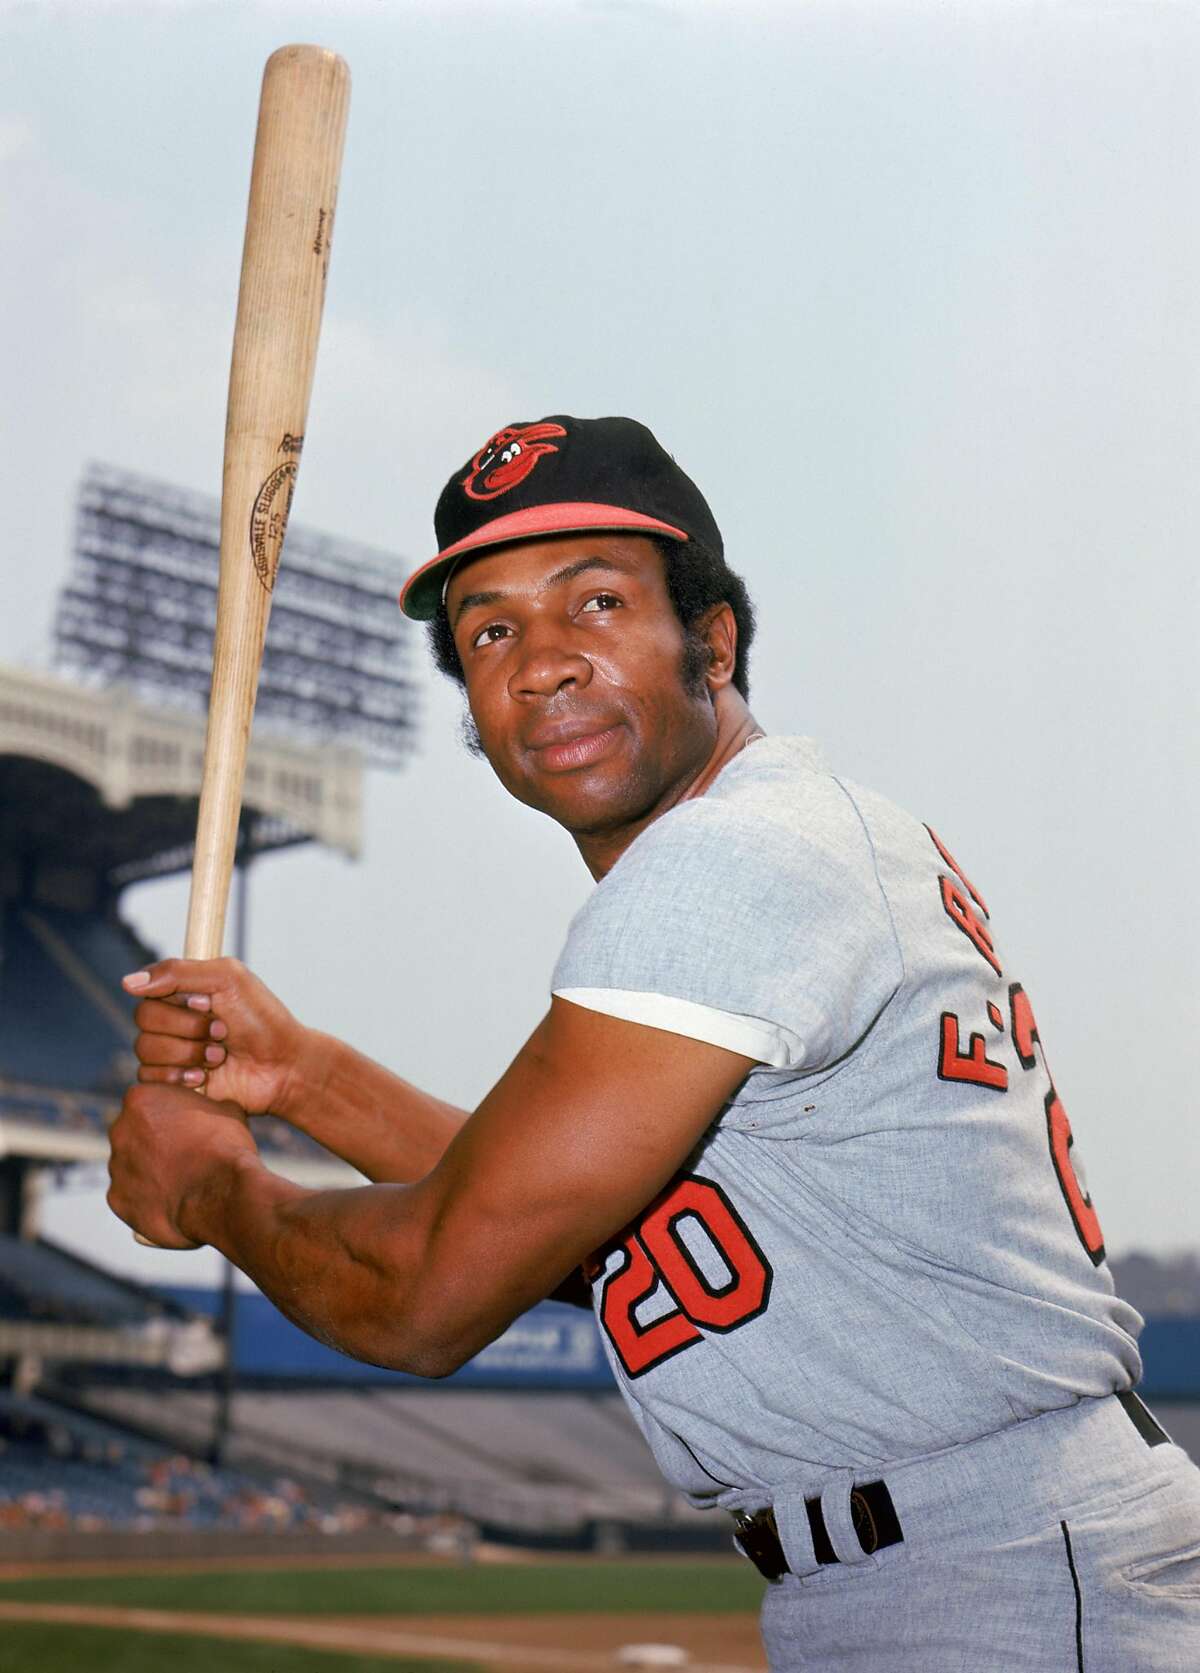 Hall of Famer and former Giants manager Frank Robinson passes away at 83 –  KNBR